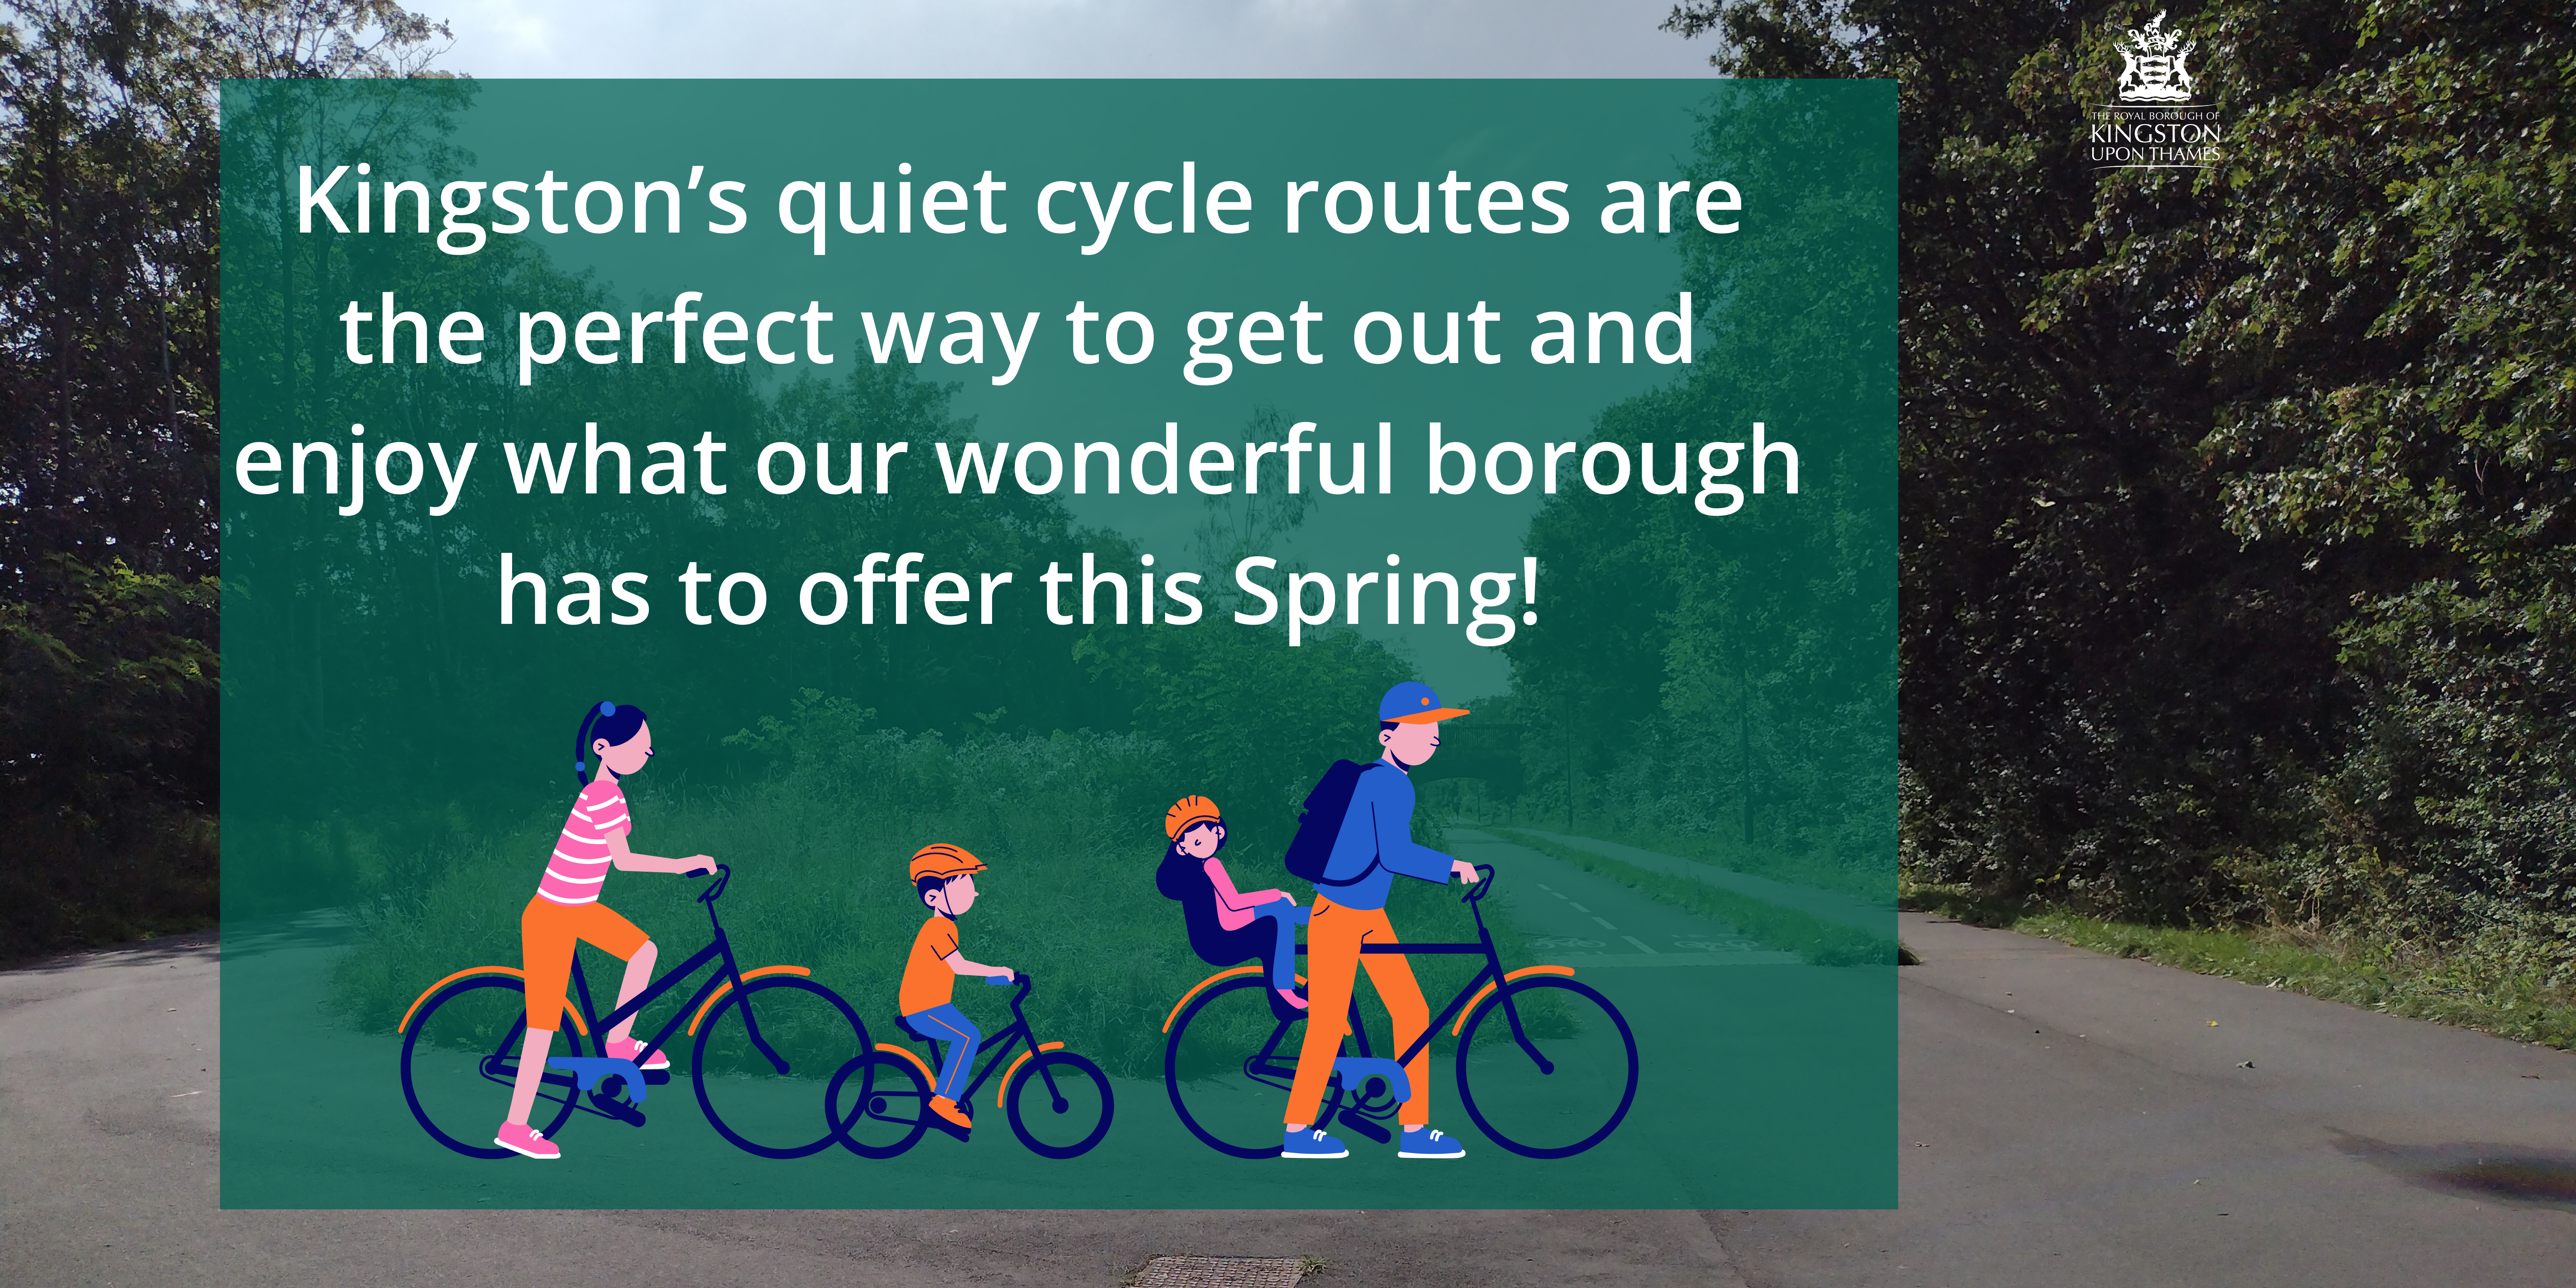 Kingston's quiet cycle routes are the perfect way to get out and enjoy what our wonderful borough has to offer this spring 2